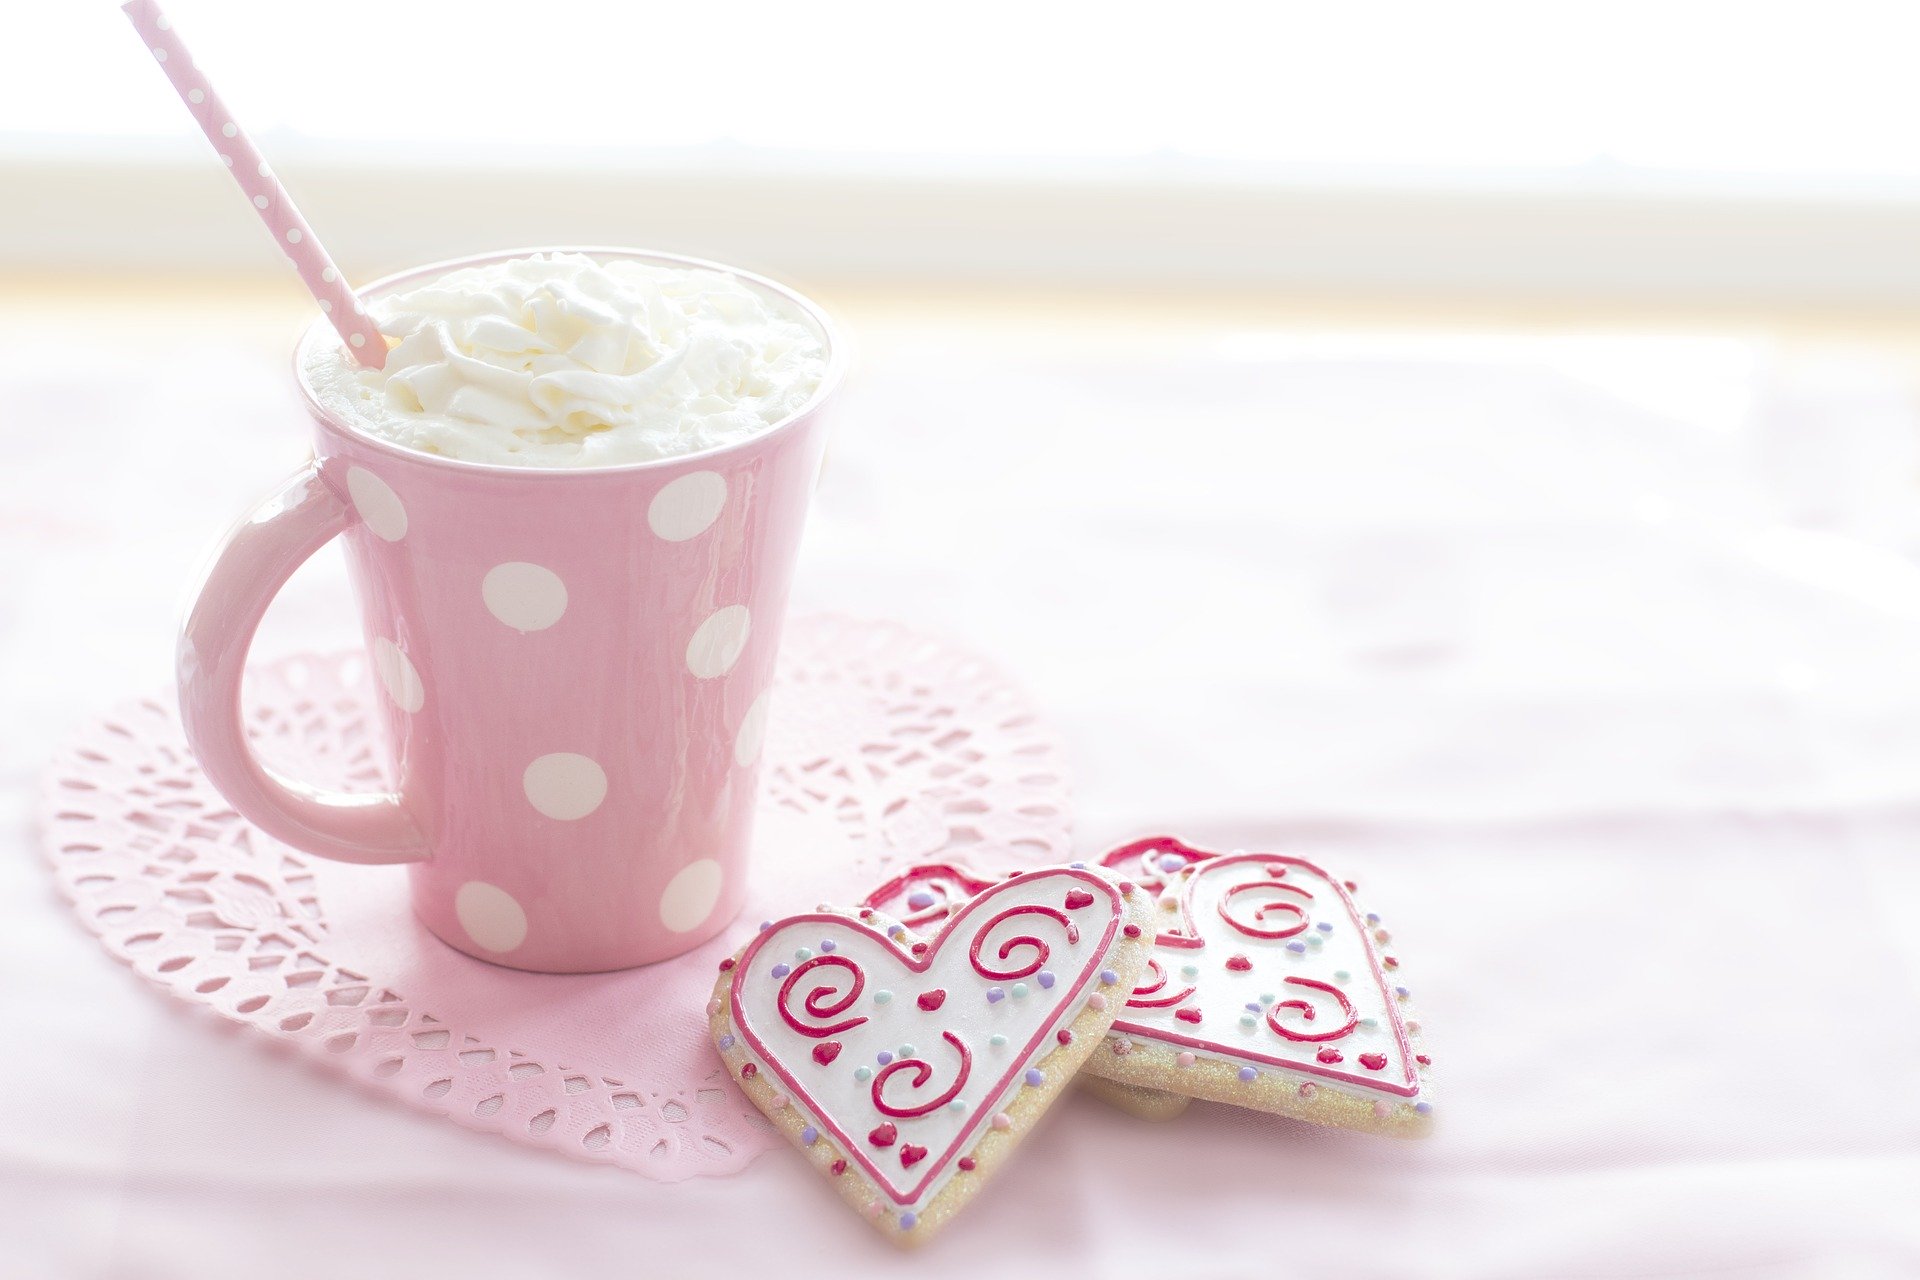 A pink mug with white polkadots with with cream and a pink and white spotted straw. It is sitting on a pink heart shaped mat, with 2 heart shaped iced cookies next to it.